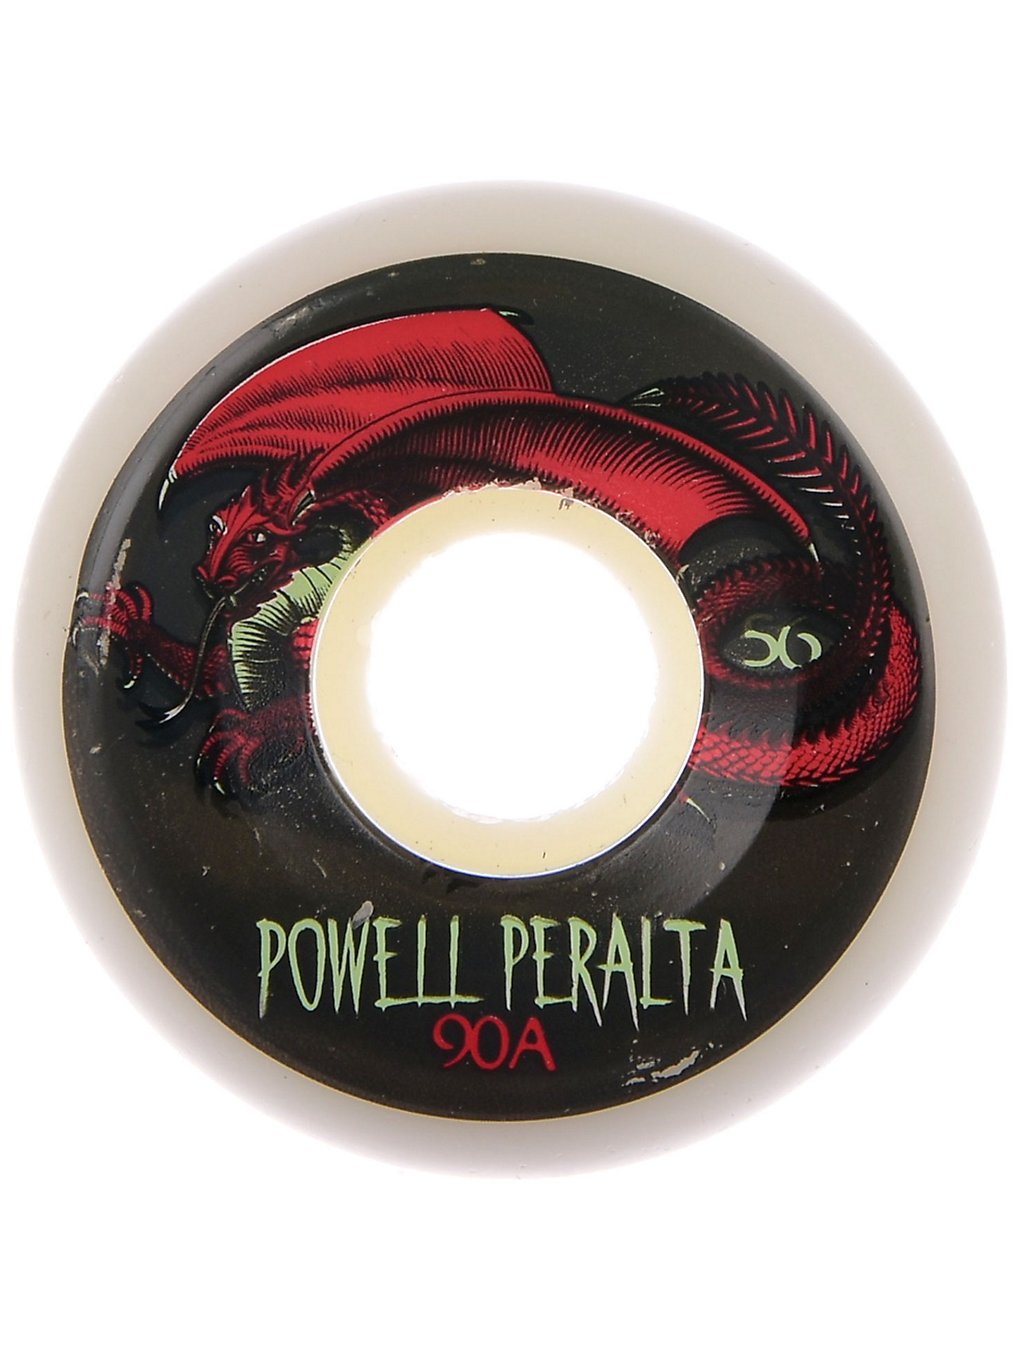 Powell Peralta Oval Dragon 90A 56mm Wheels white red